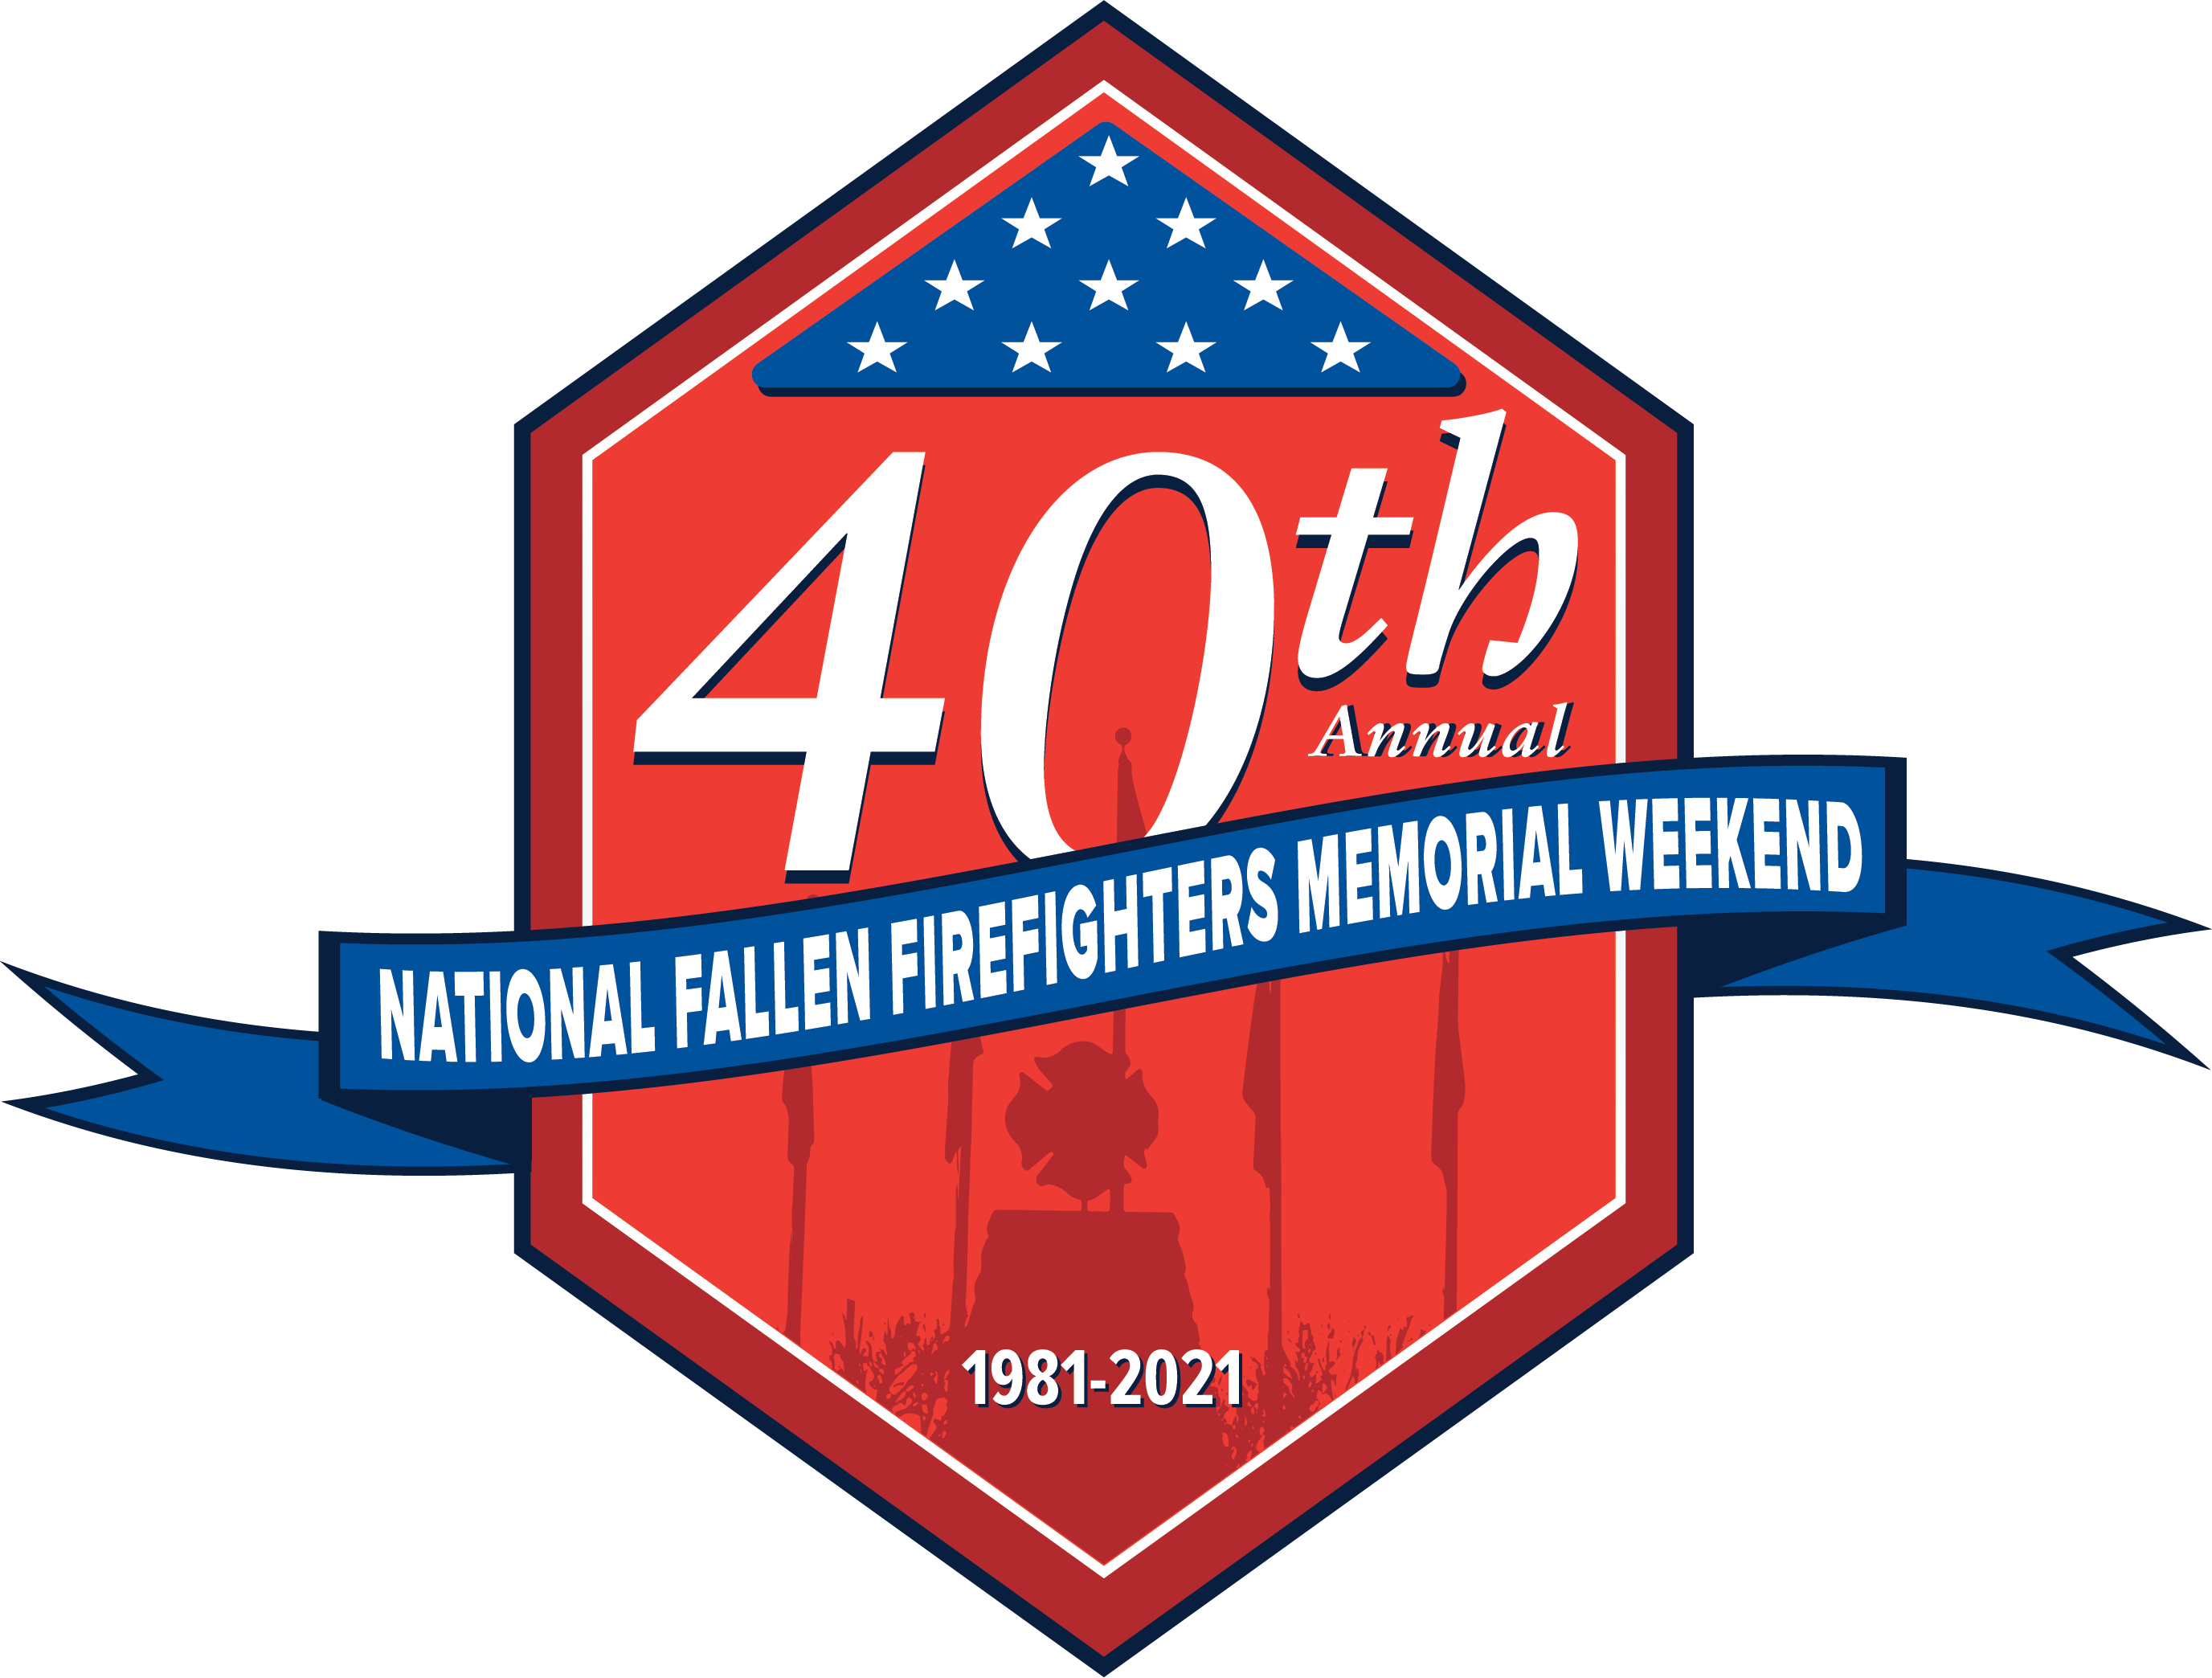 40th Annual National Fallen Firefighters Memorial Weekend